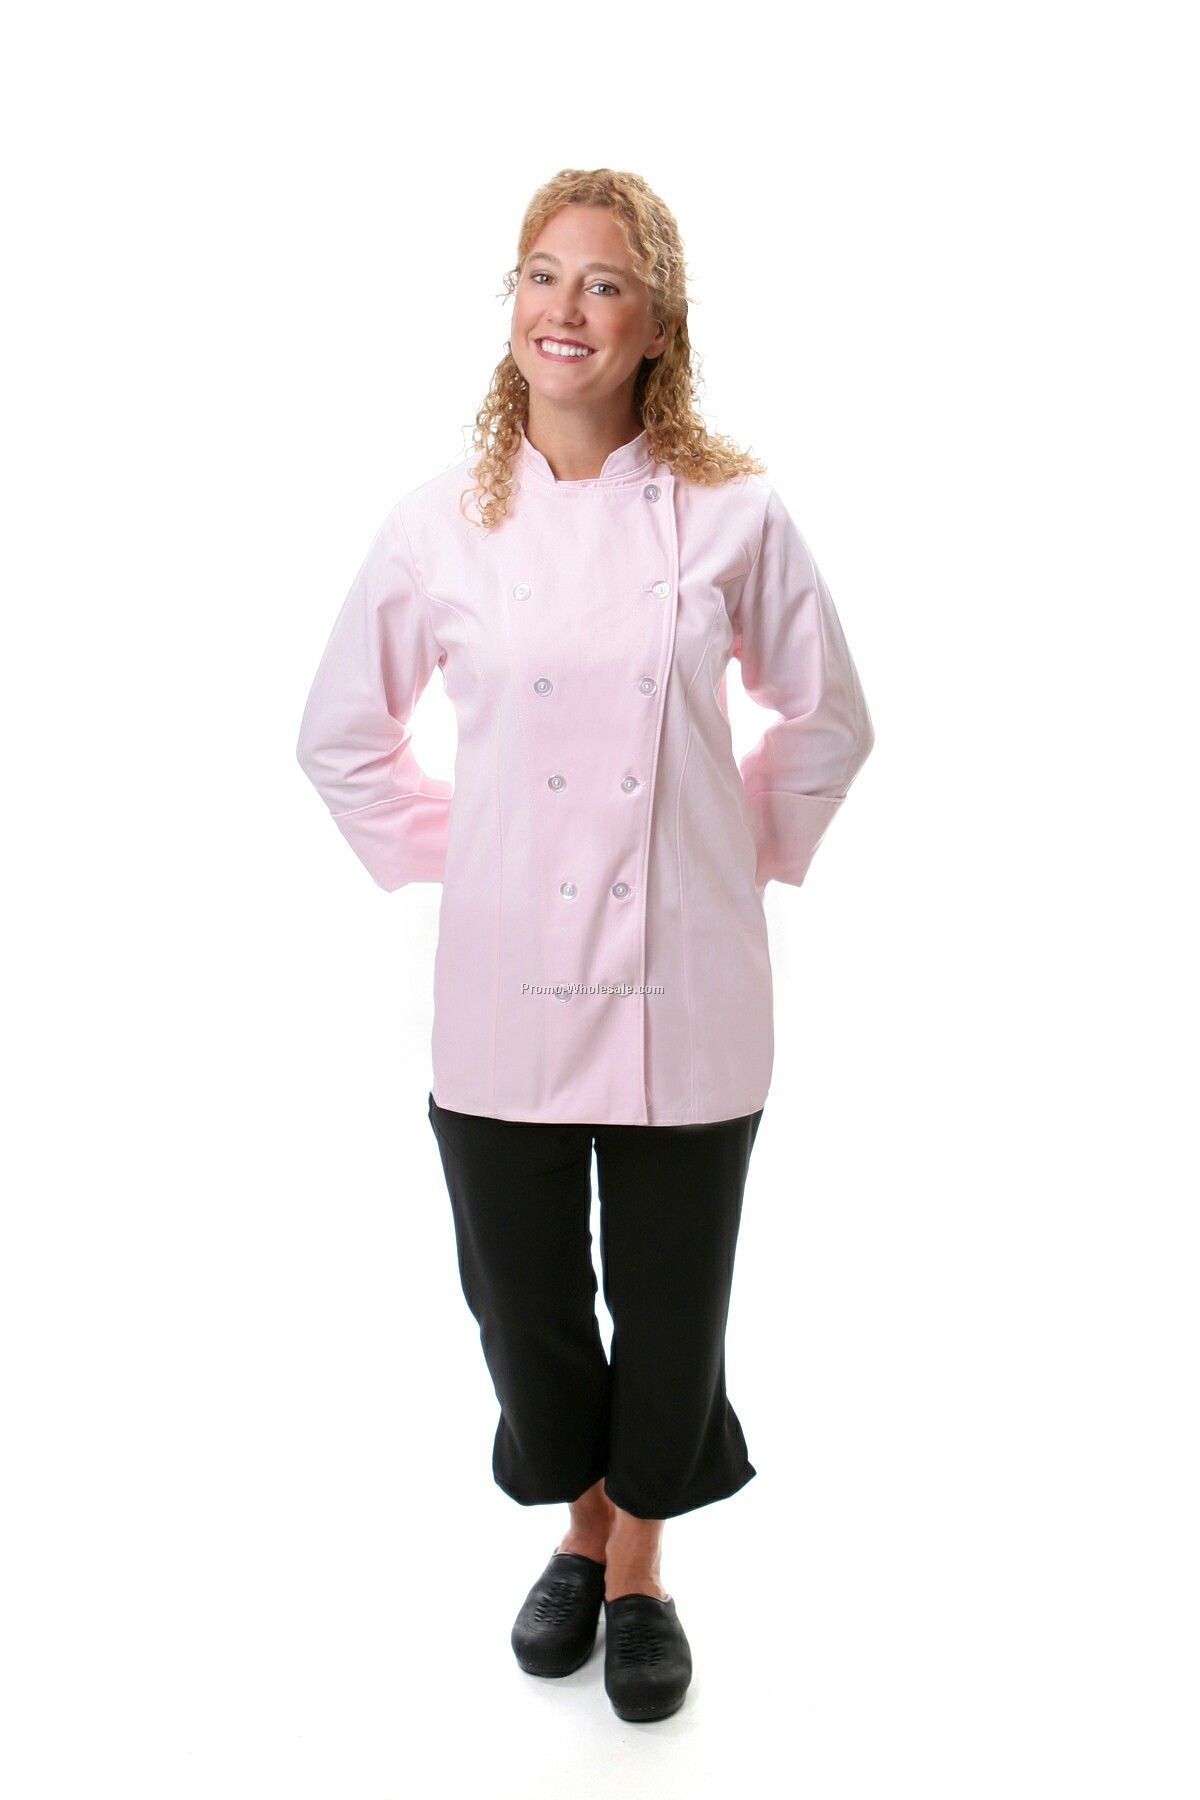 Ladies' Fitted Chef Coat - Pink (X-large)